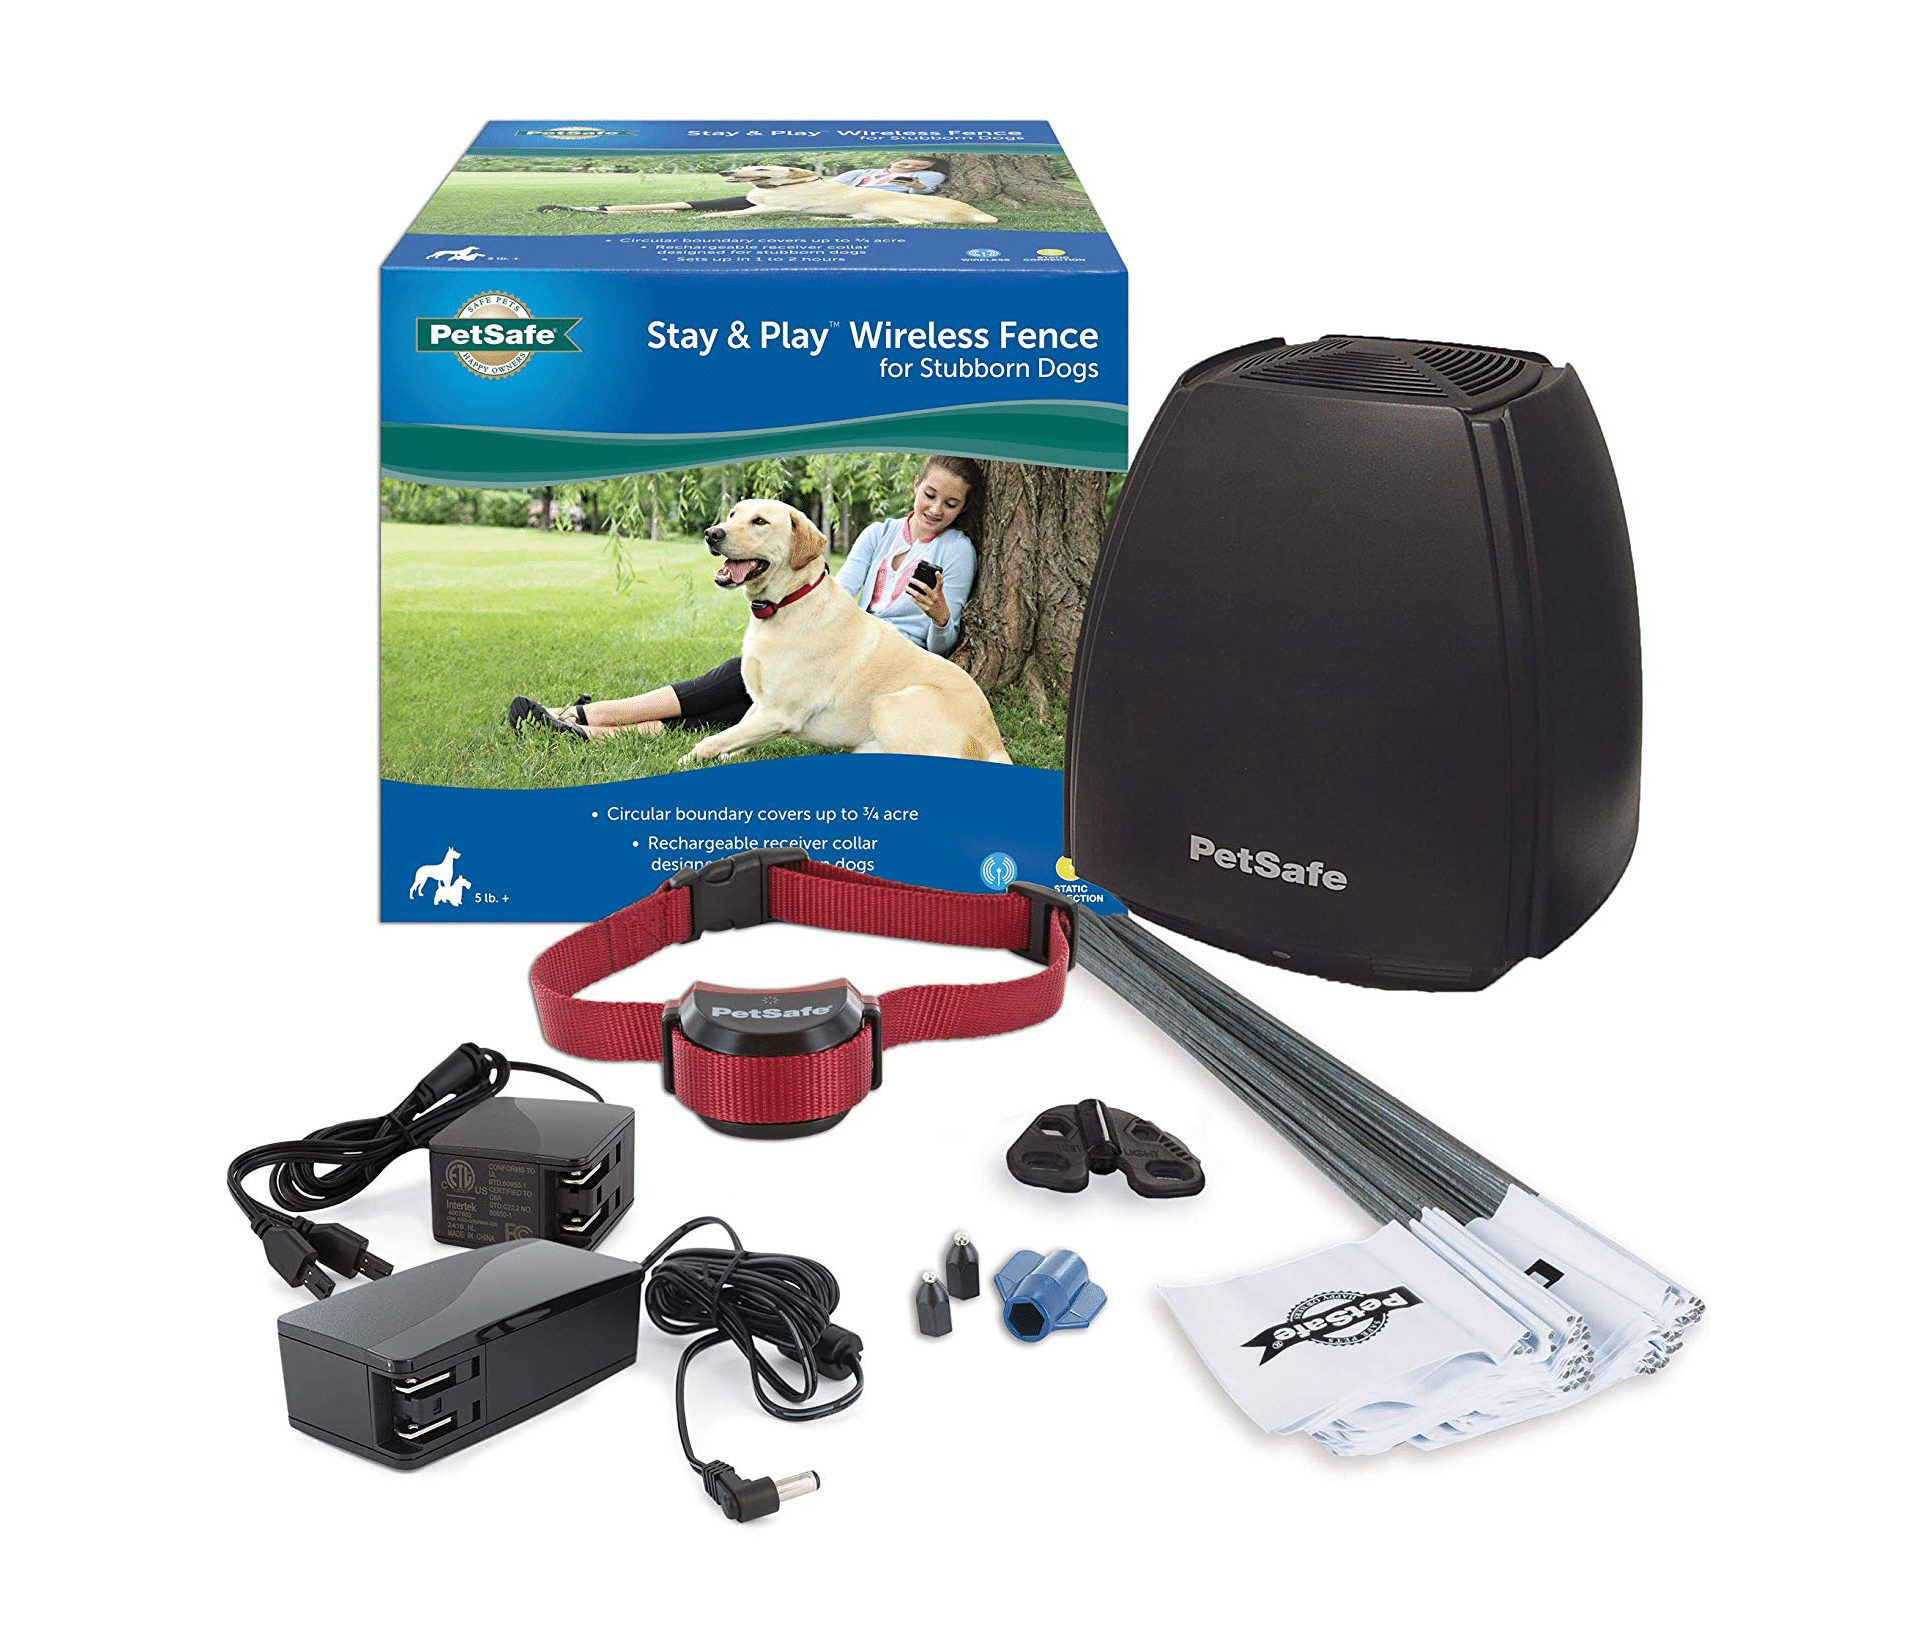 PetSafe stay & play wireless dog fence for stubborn dogs